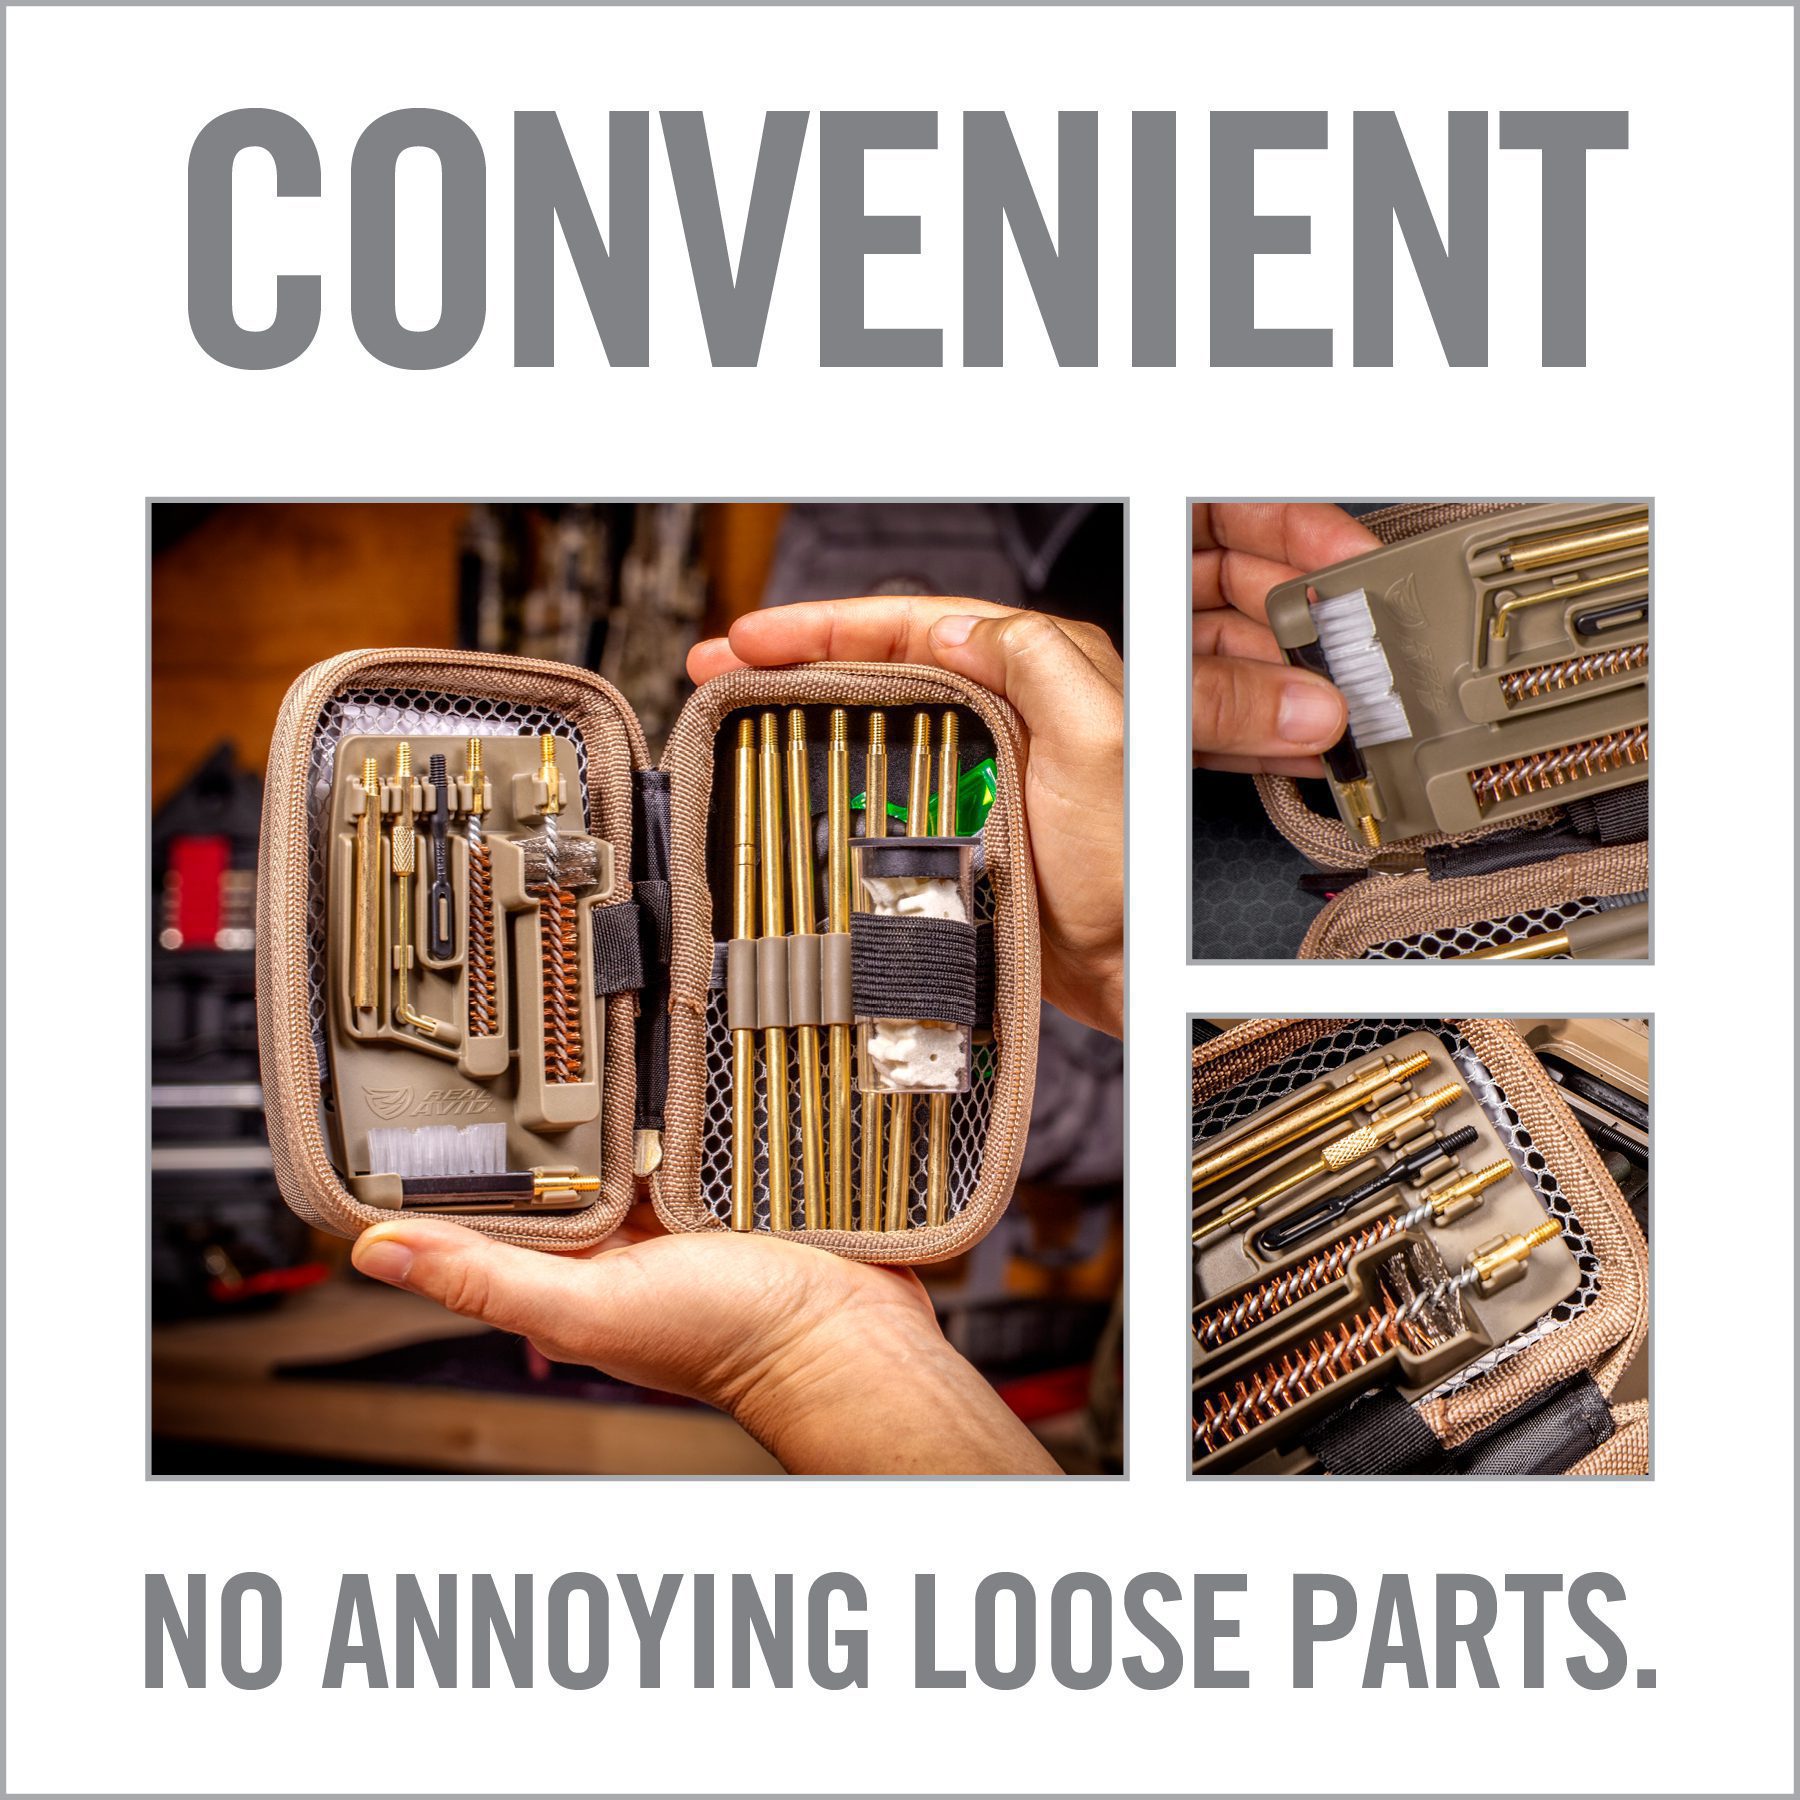 an advertisement for a tool storage case